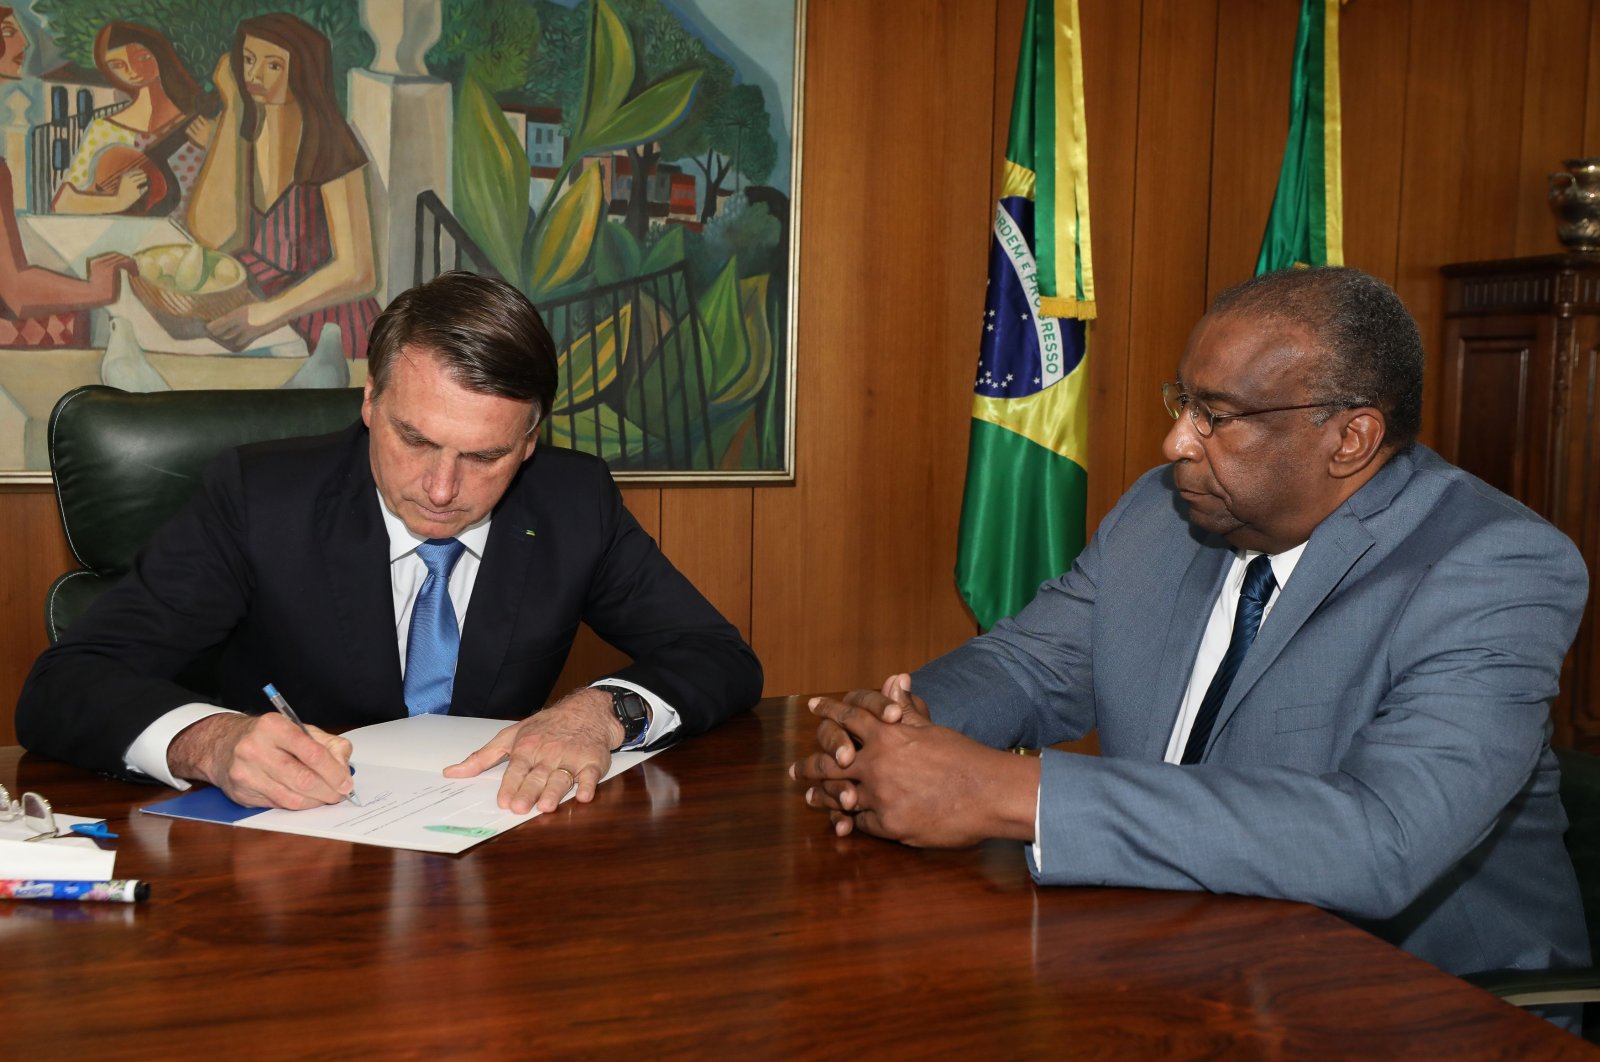 A handout photo released by the Brazilian Presidency press office shows President Jair Bolsonaro (L) and his new Minister of Education Carlos Alberto Decotelli, the first black minister in his Cabinet, at Planalto Palace in Brasilia, Brazil, June 26, 2020. (AFP Photo / Brazilian Presidency)